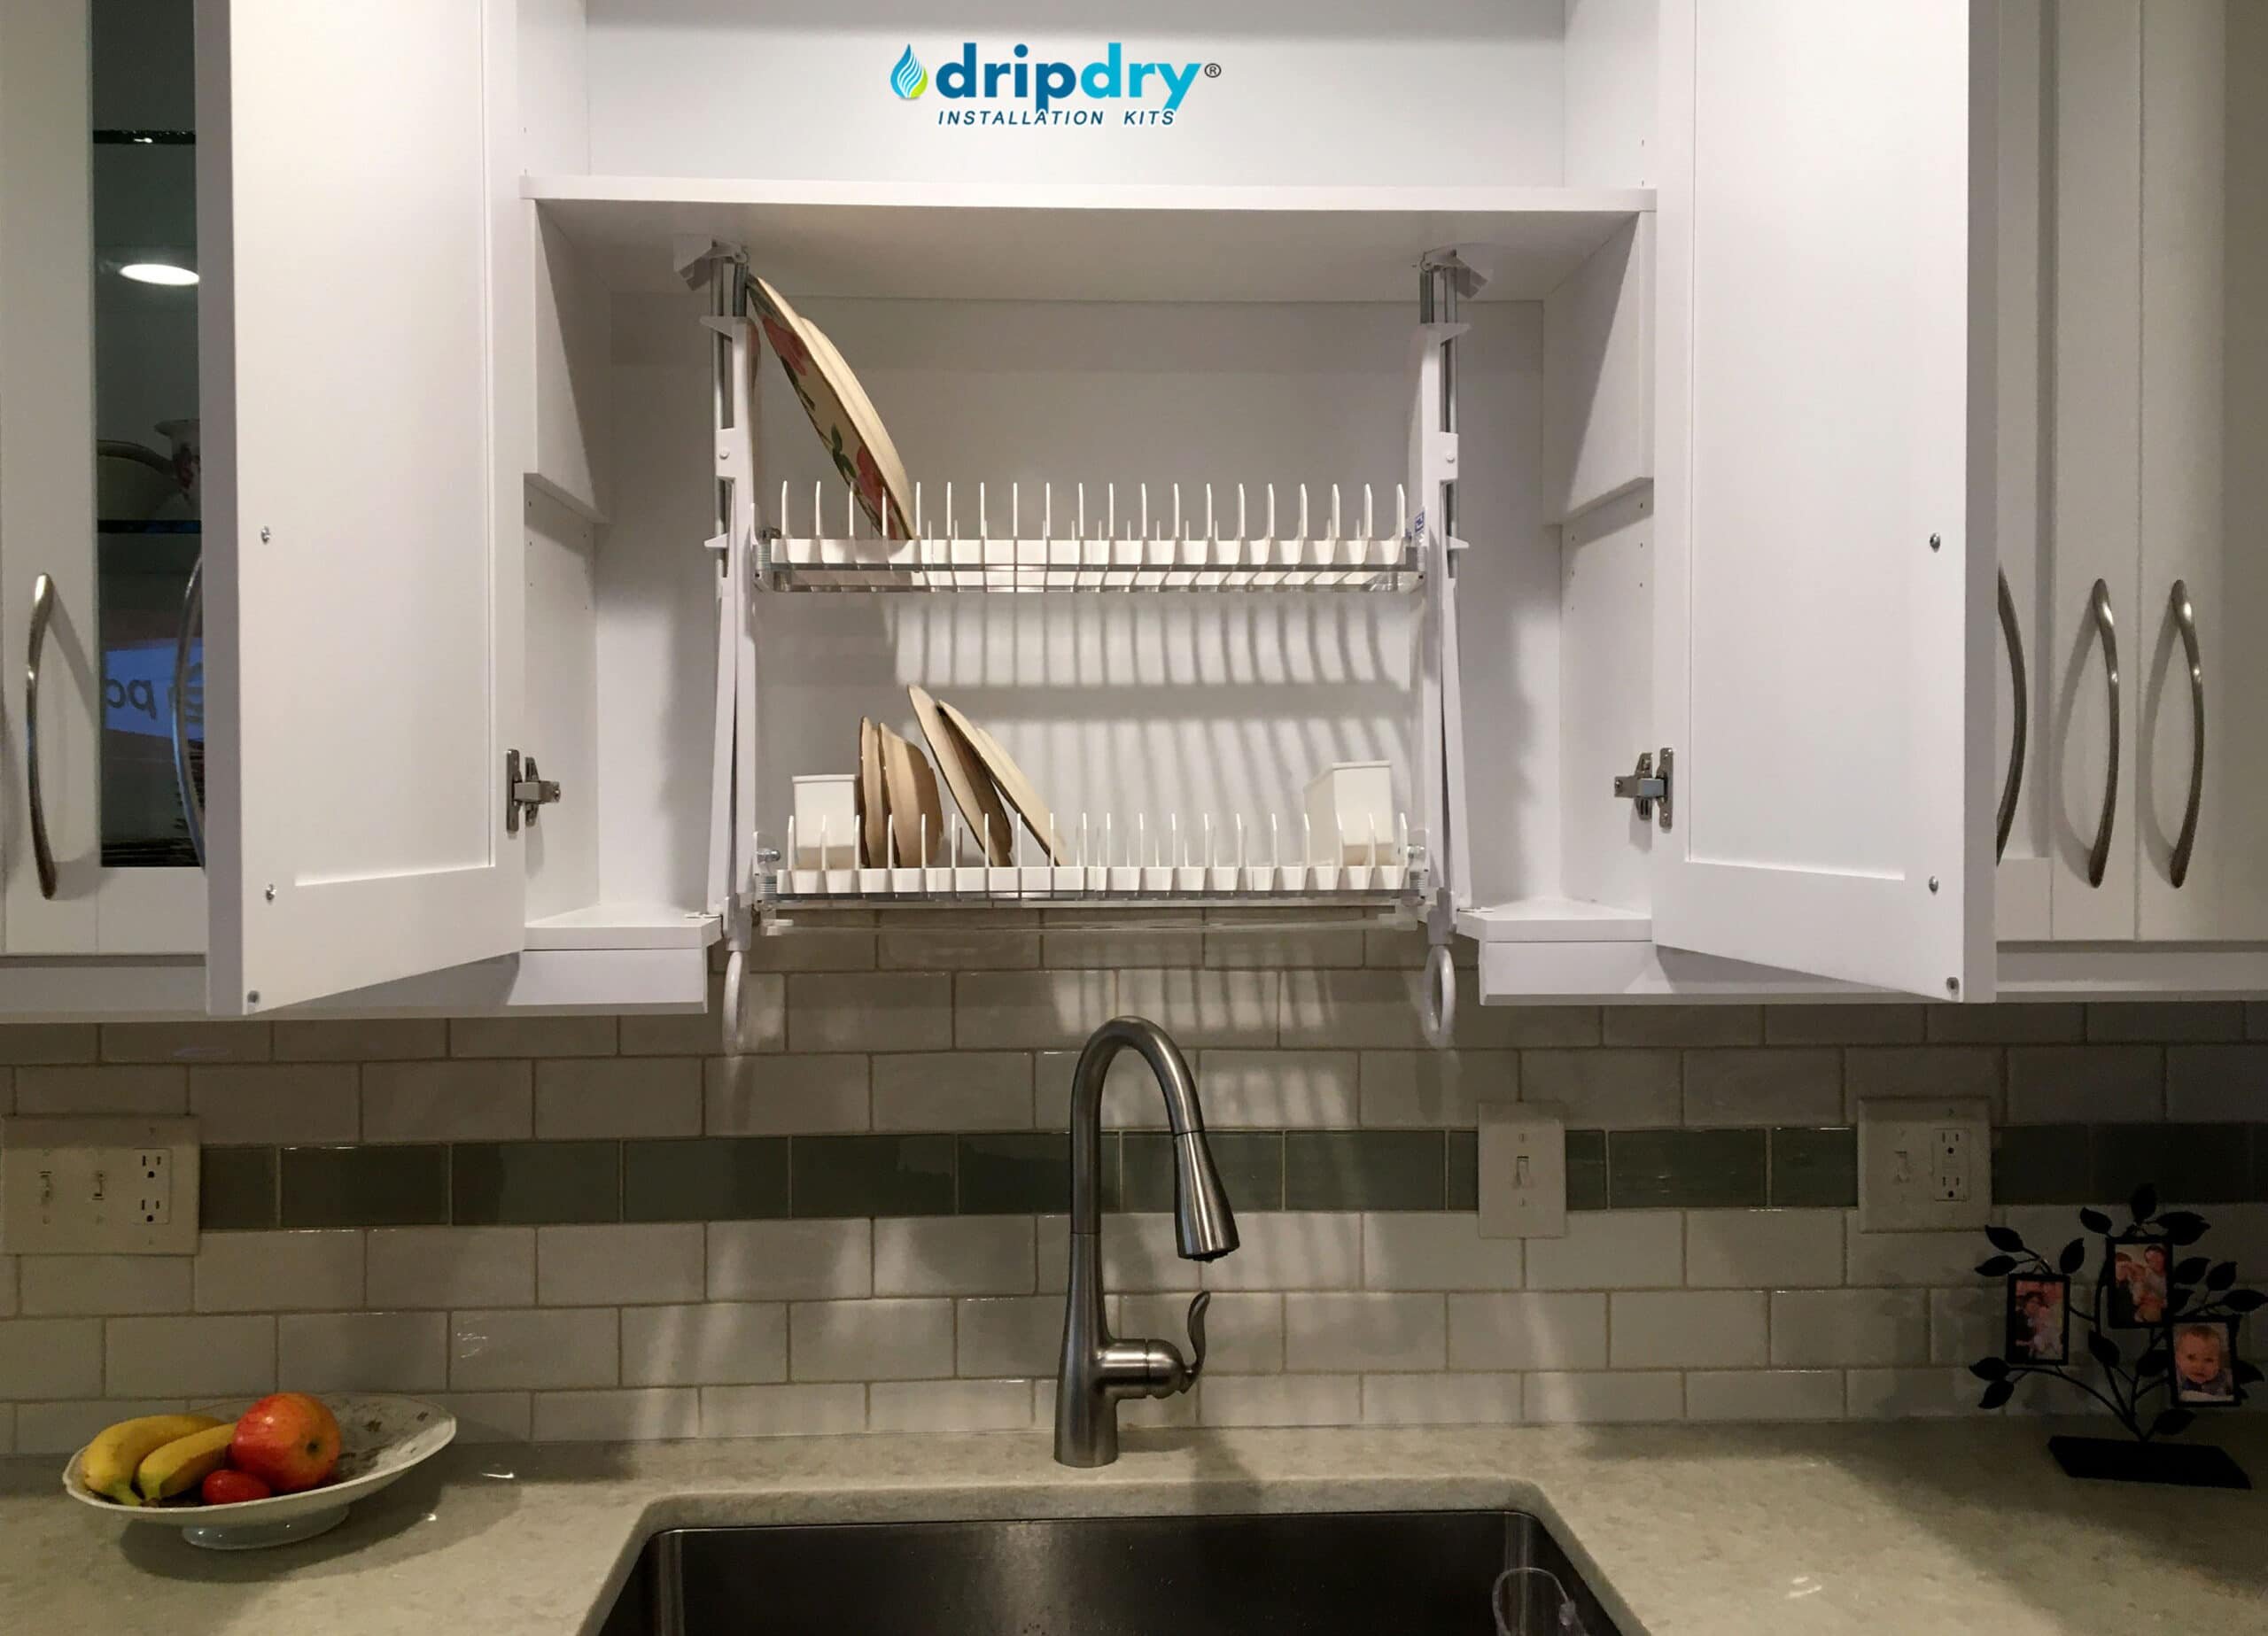 dripdry drying rack fits all cabinets